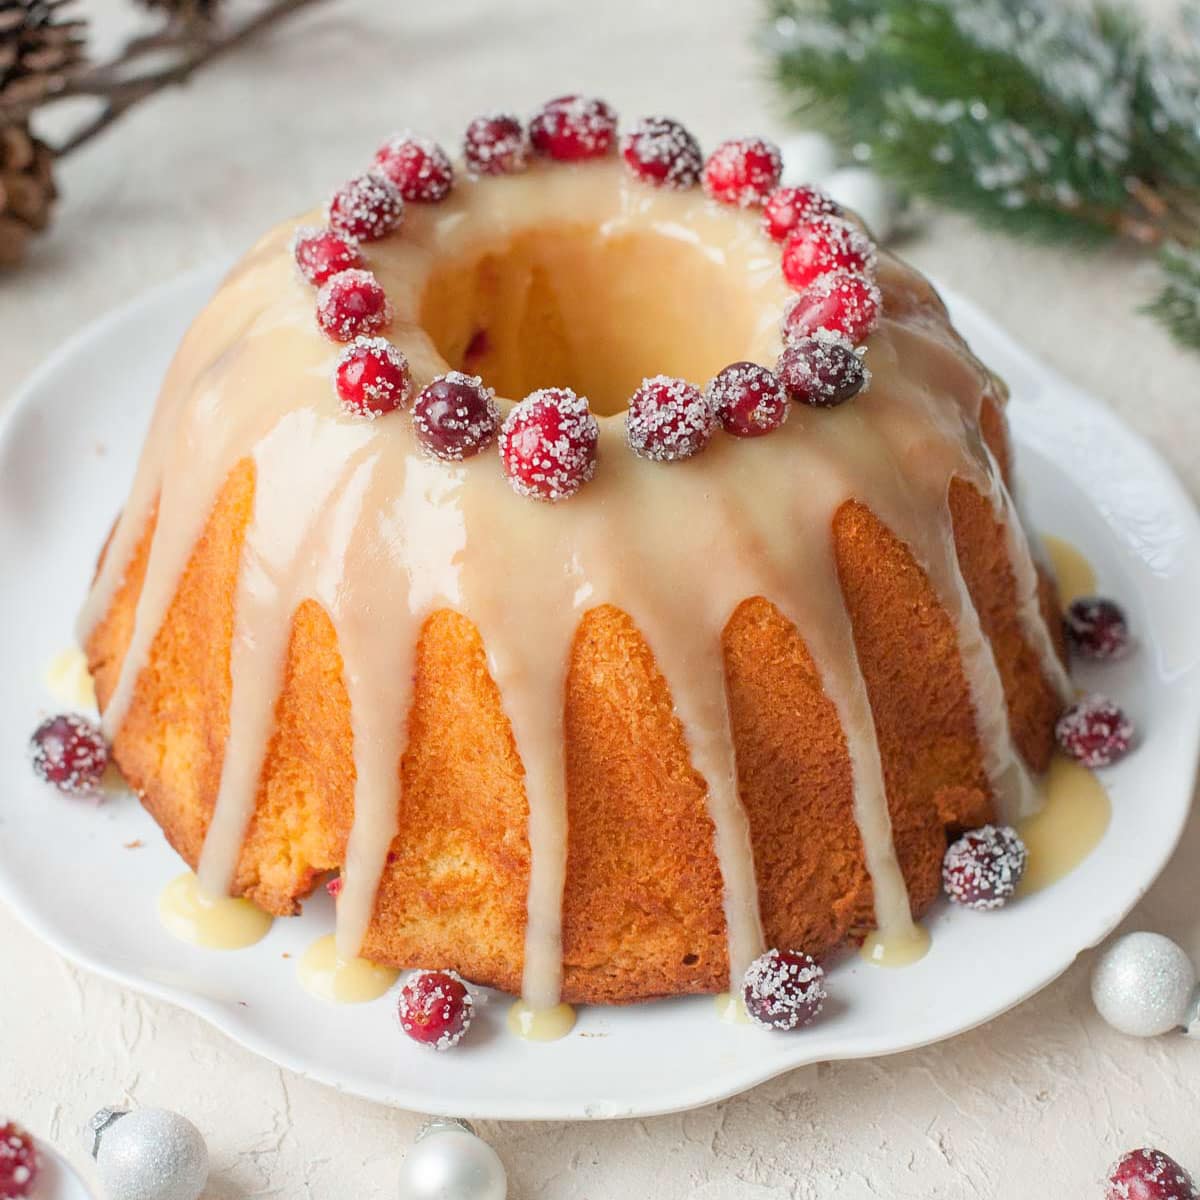 Cranberry orange bundt cake decorated with sugared cranberries on a white plate.